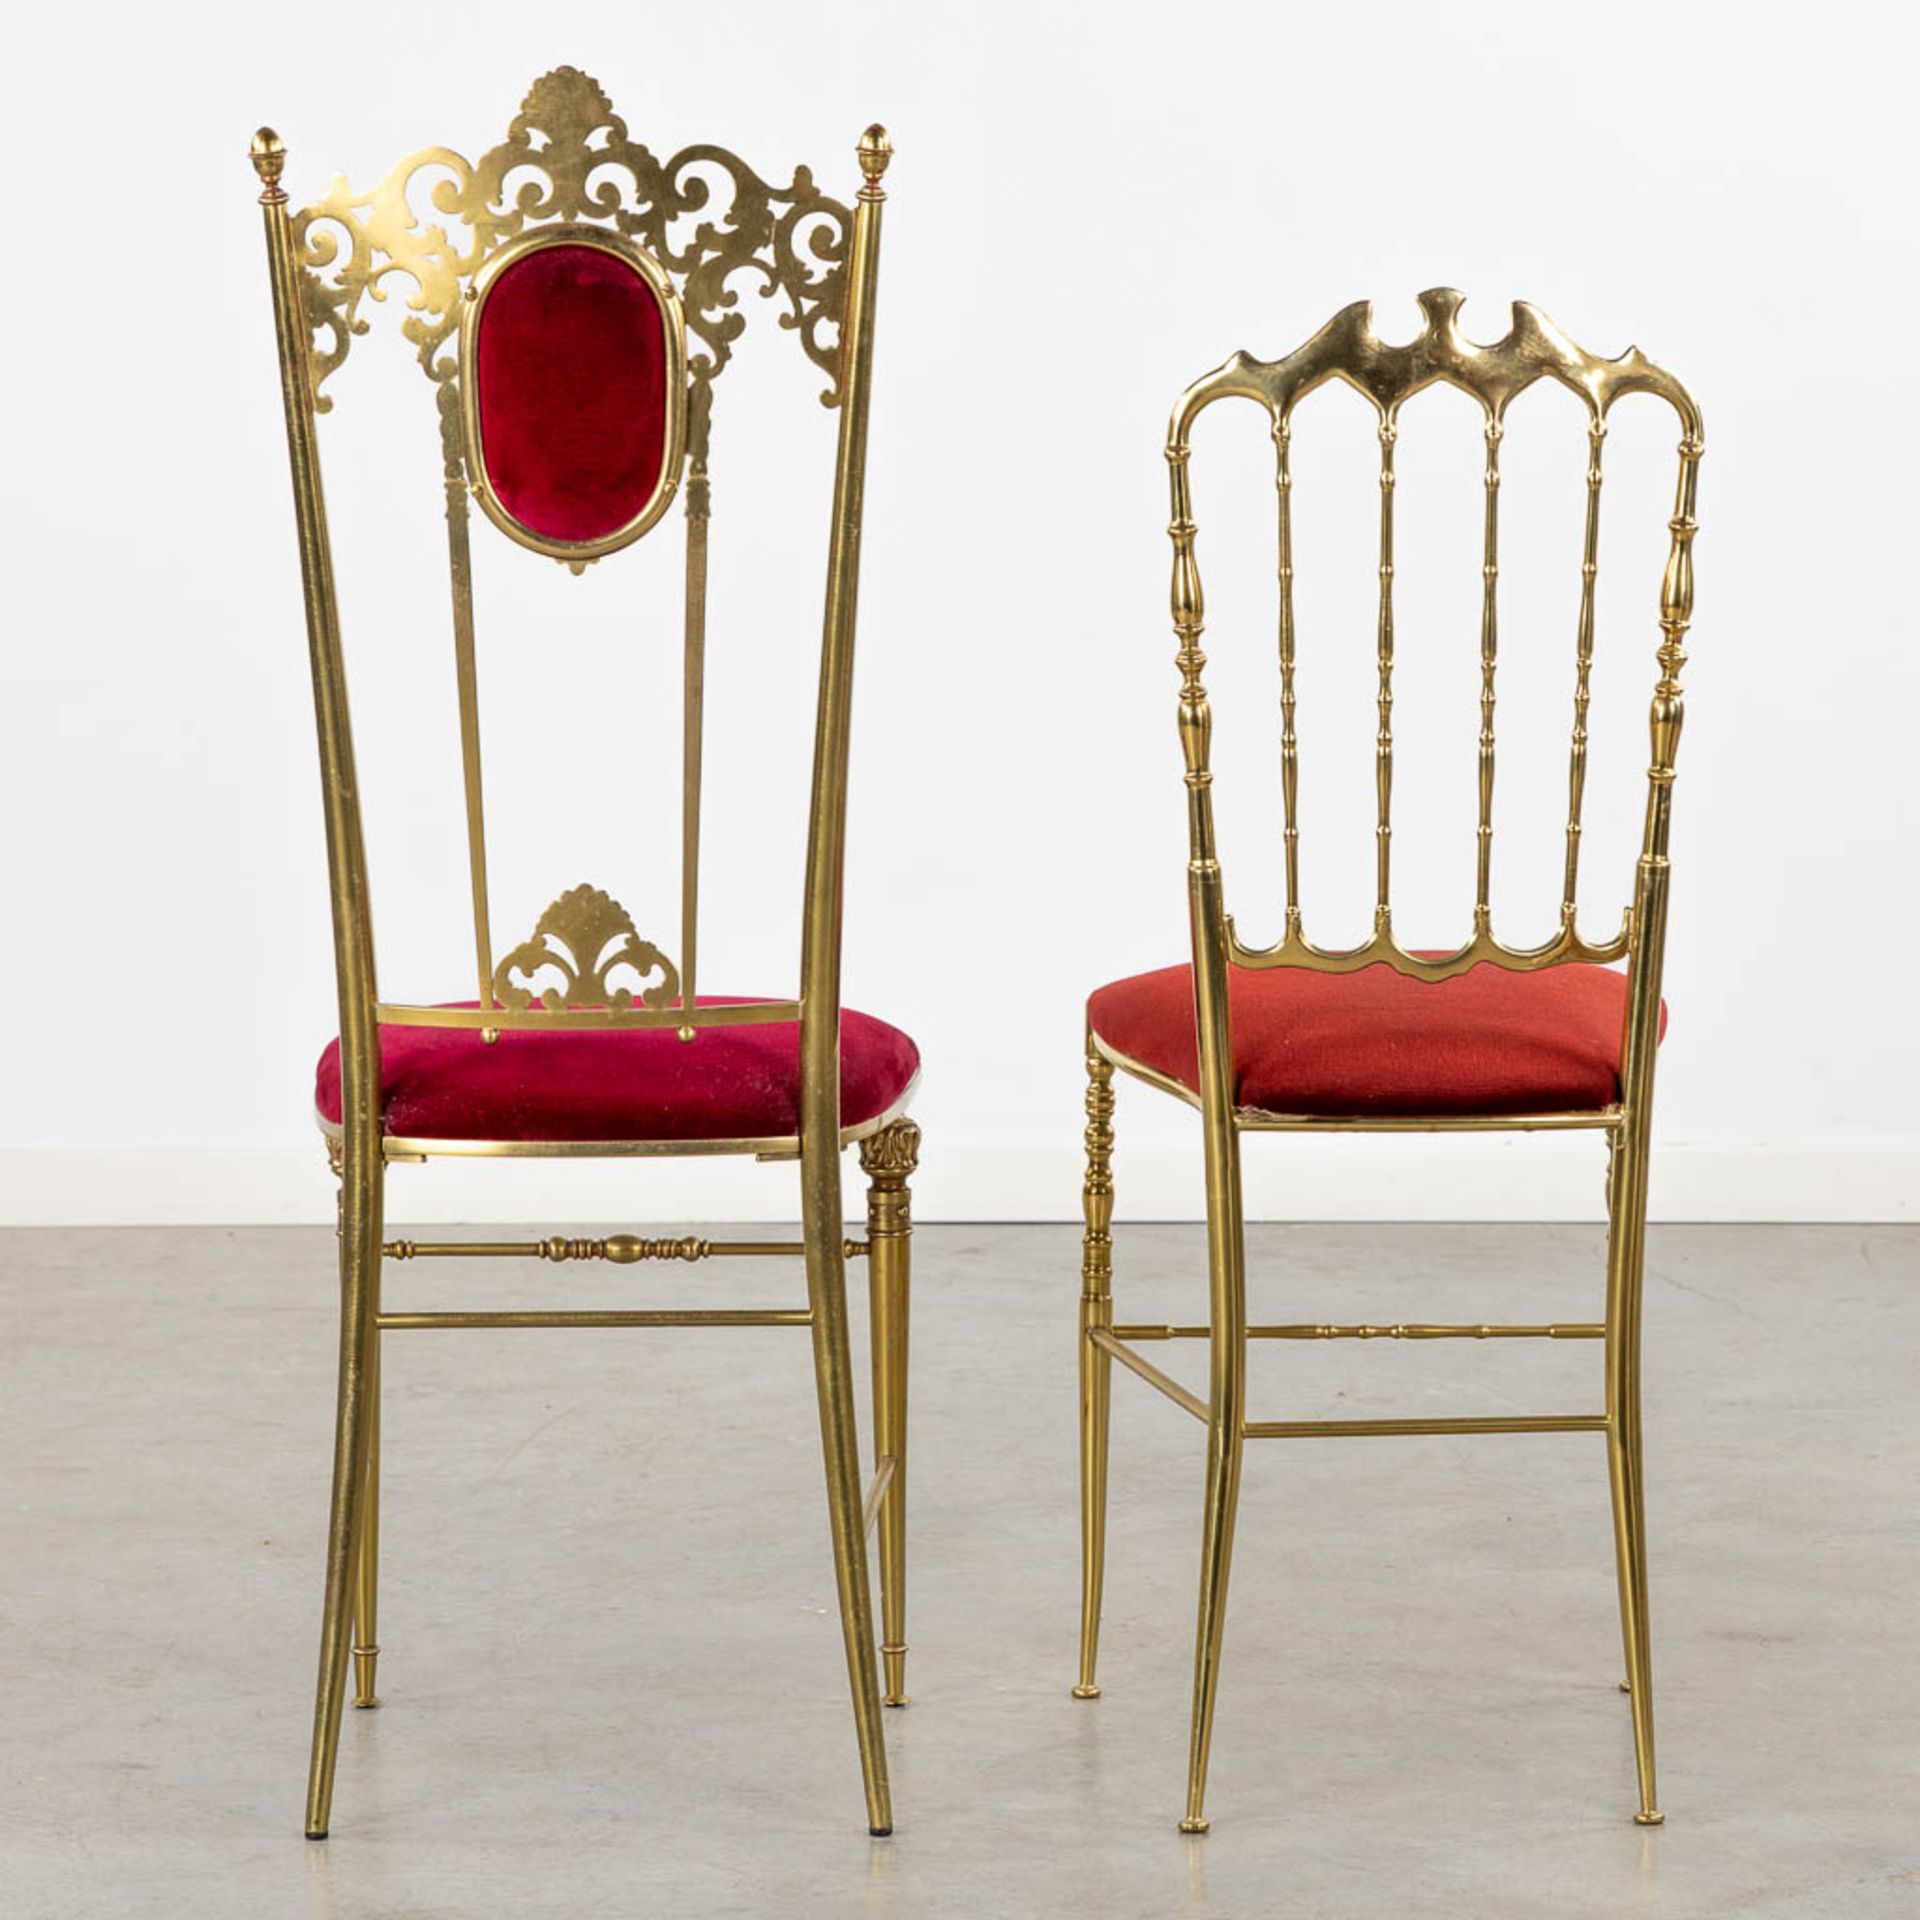 Two Metal and gilt chairs, circa 1970. (L:40 x W:40 x H:108 cm) - Image 5 of 10